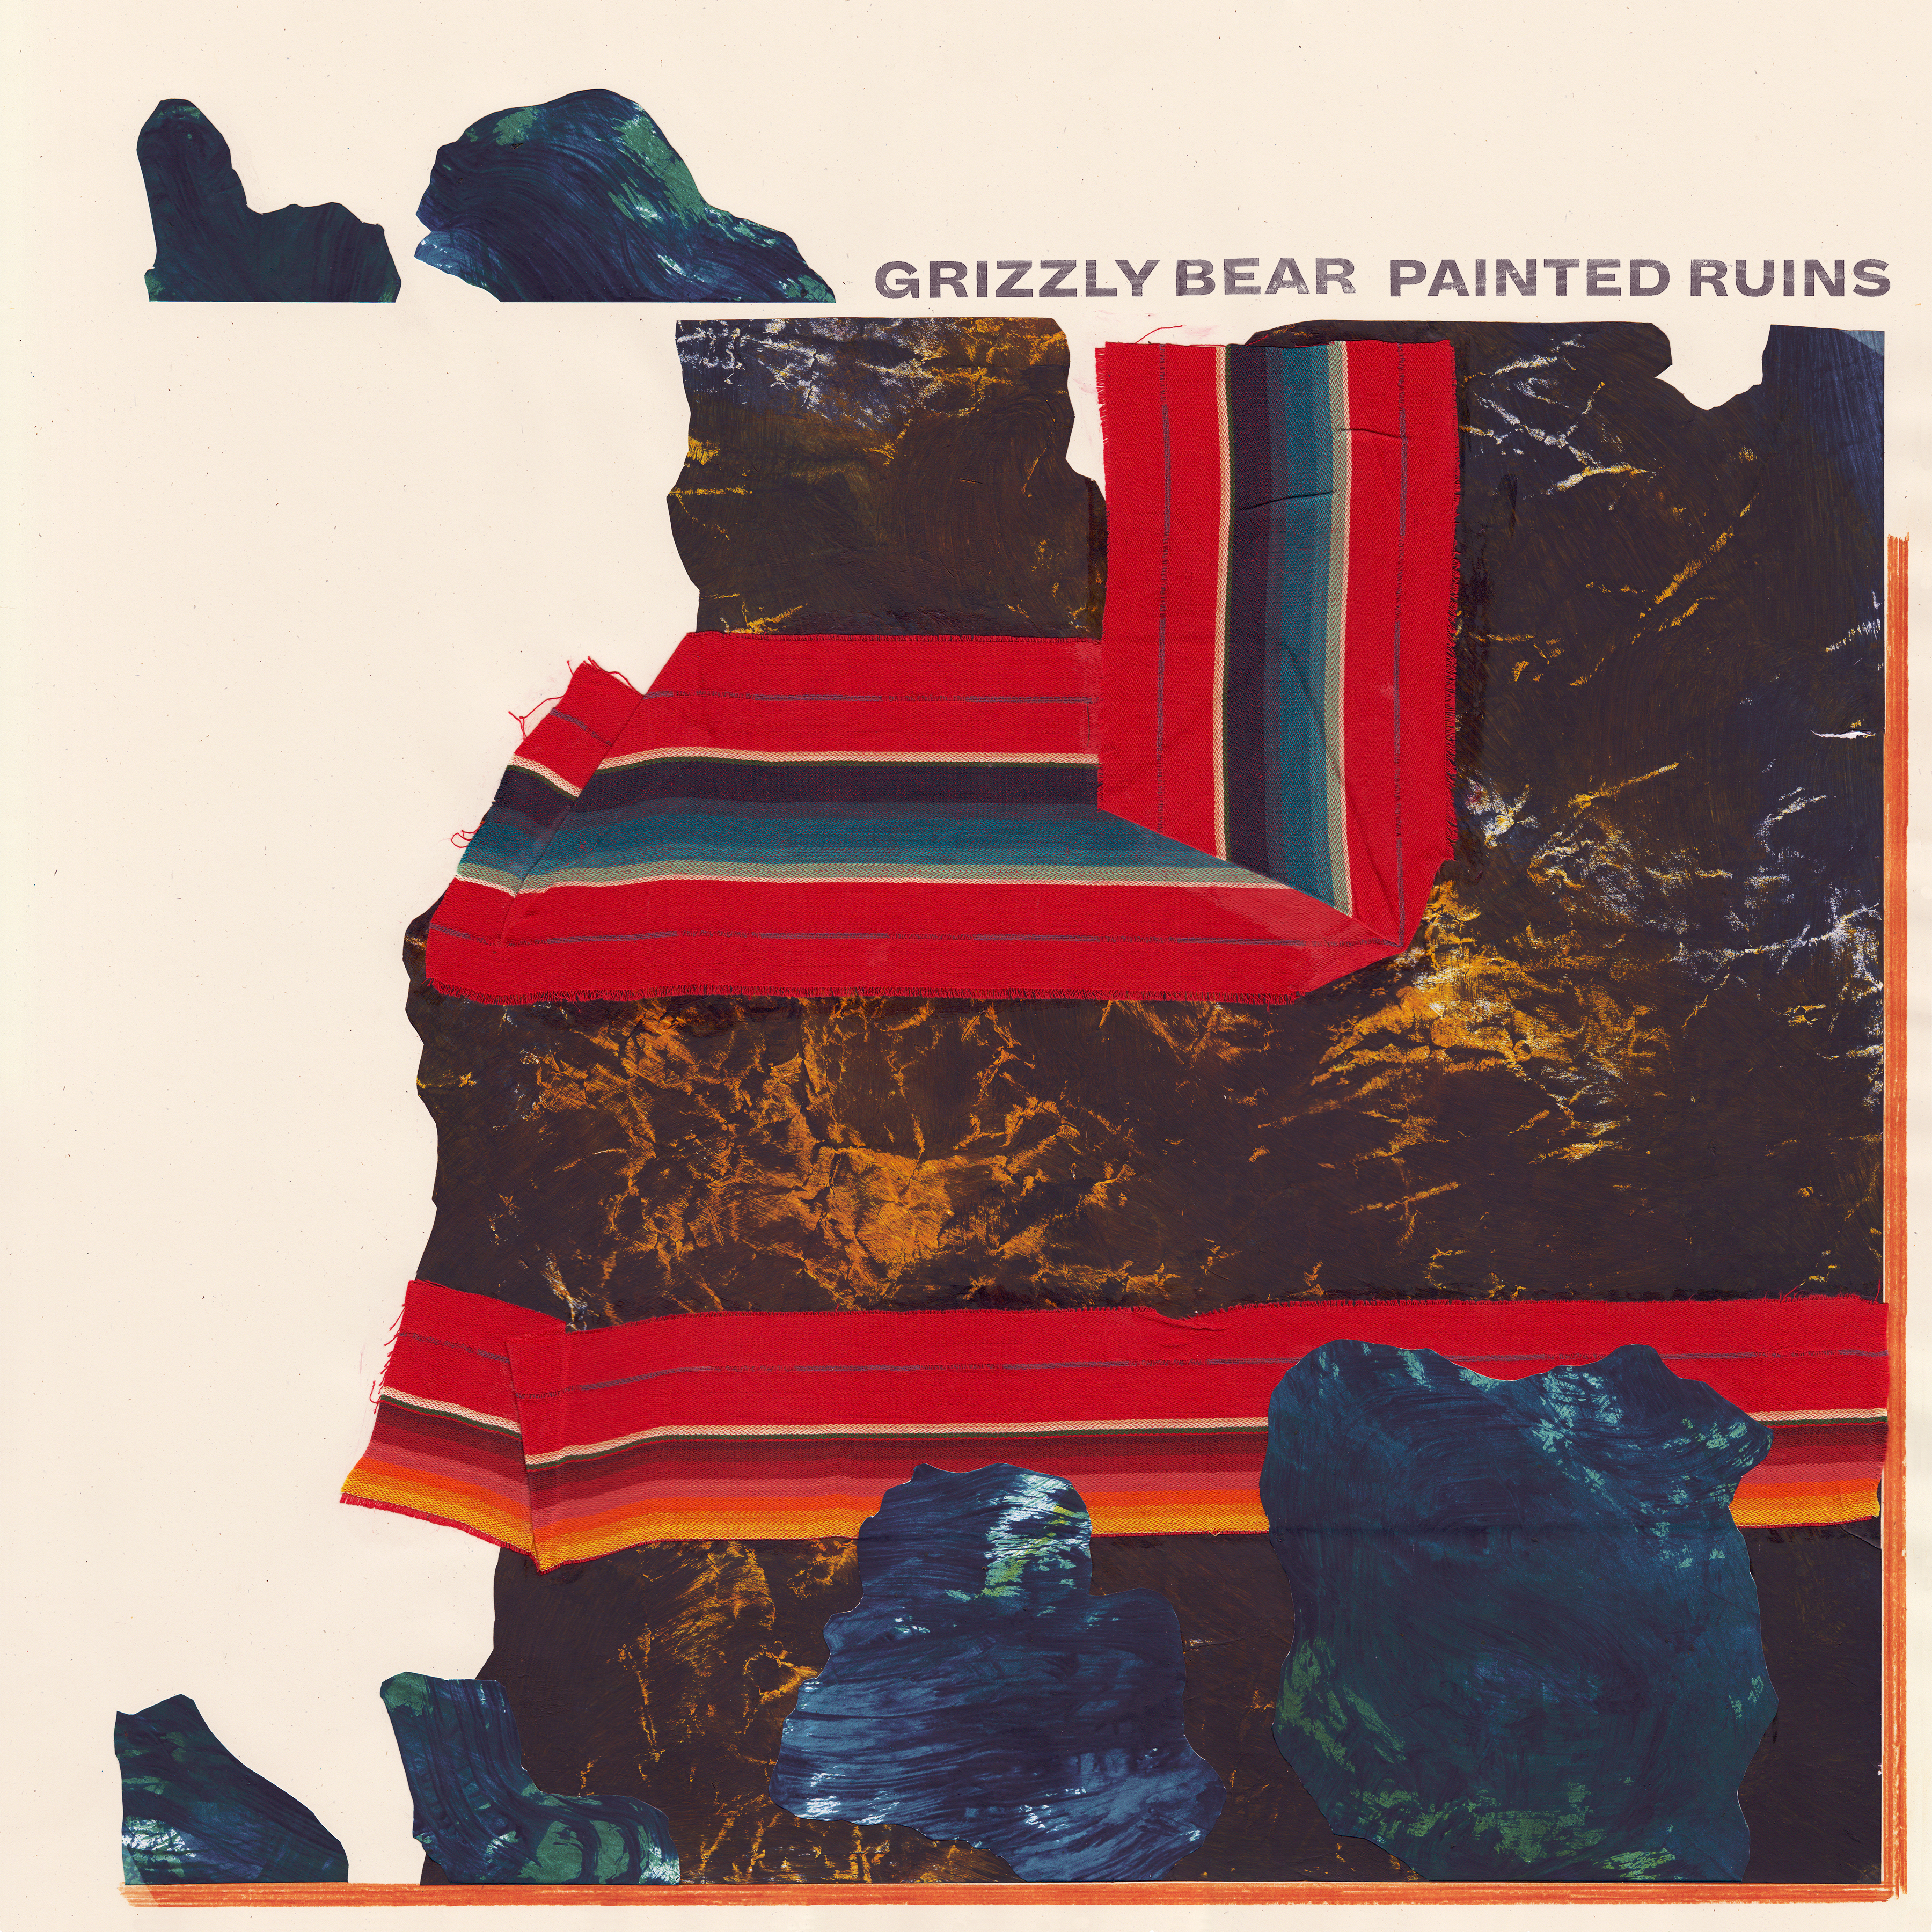 Grizzly Bear Announce New Album <i>Painted Ruins</i>, Share World Tour Dates” title=”Grizzly_Bear_Painted_Ruins_300dpi_12in_-_HiRes-1495051565″ data-original-id=”241021″ data-adjusted-id=”241021″ class=”sm_size_full_width sm_alignment_center ” data-image-source=”getty” /></p>
<div class=